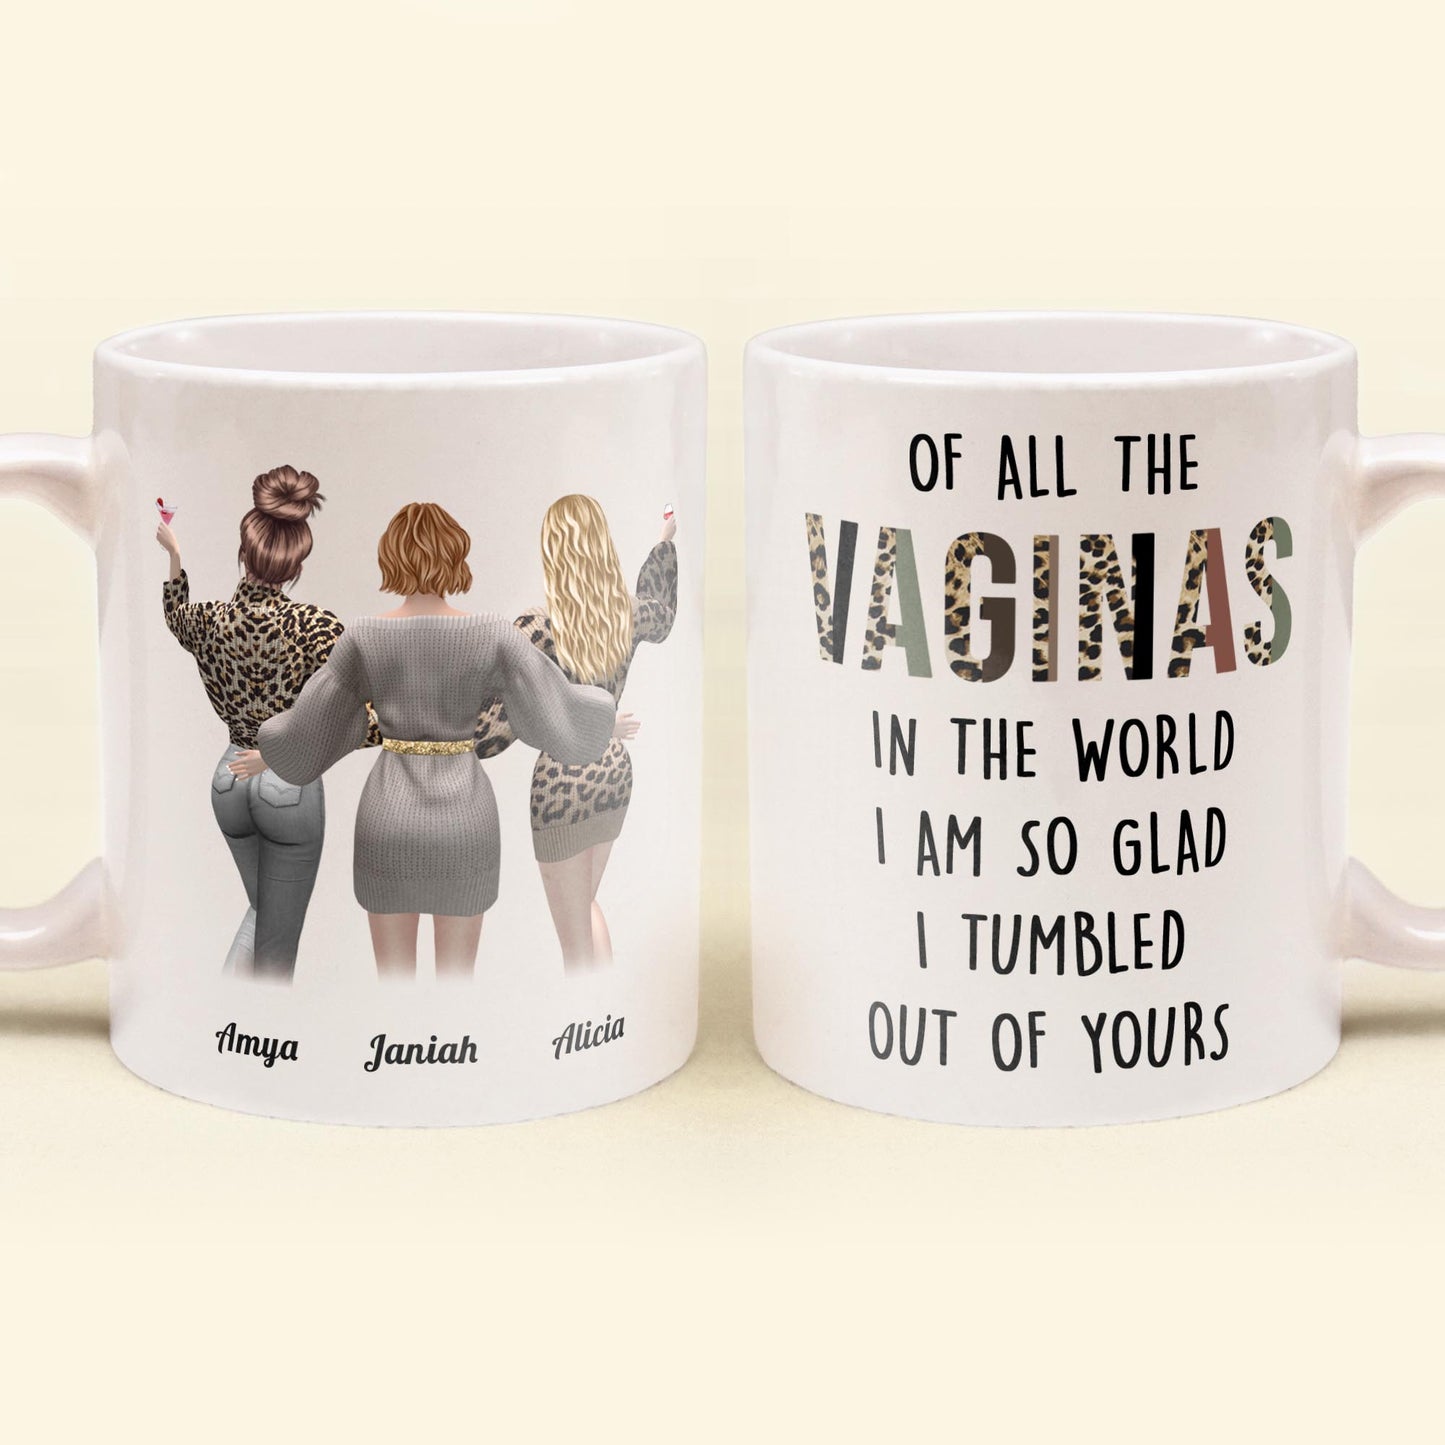 I Am So Glad I Tumbled Out Of Yours - Personalized Mug - Birthday Gift Mother's Day Gift For Mom - Gift From Daughters